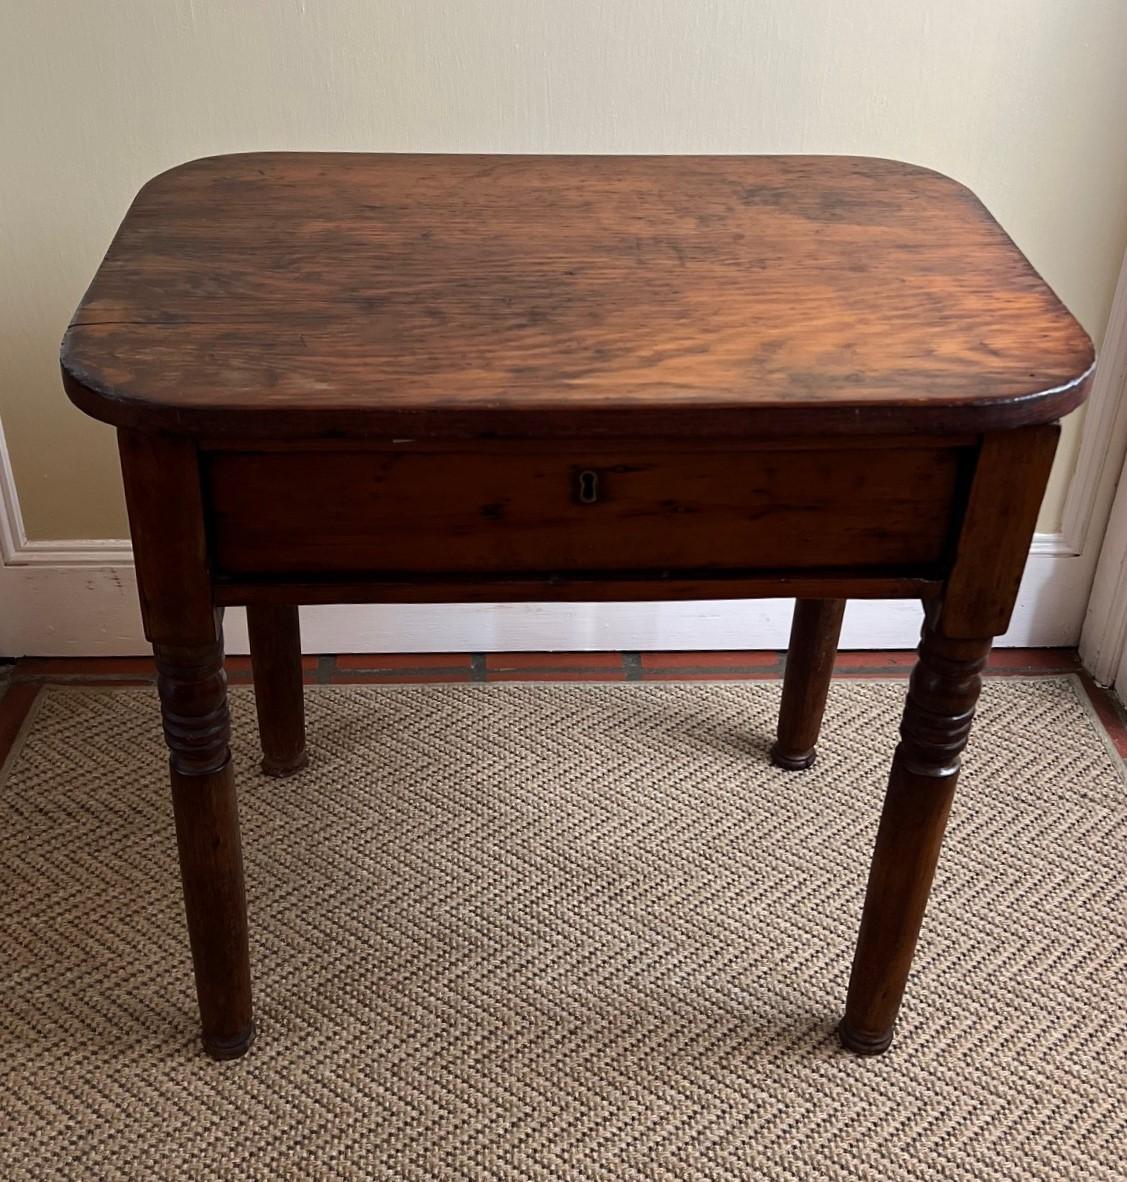 Early 20th C Rustic Bobbin Leg Side Table With Single Plank Top For Sale 6